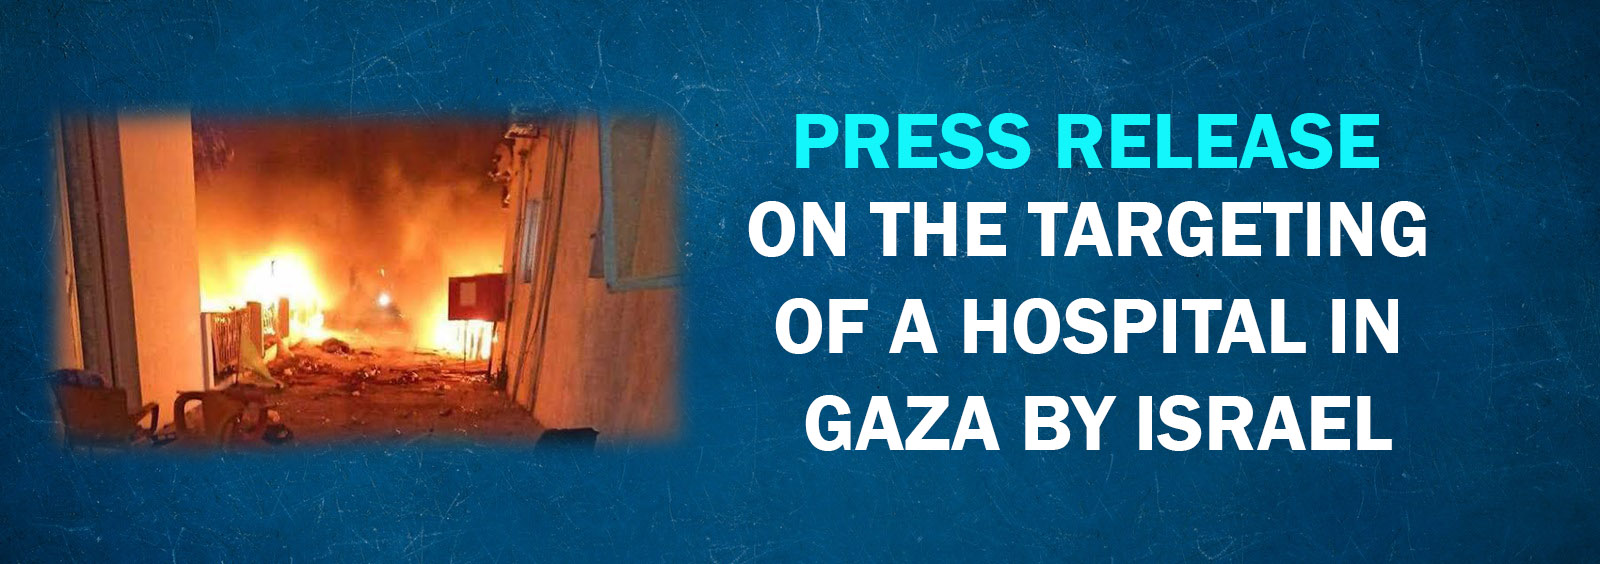 Press Release on the Targeting of a Hospital in Gaza by Israel